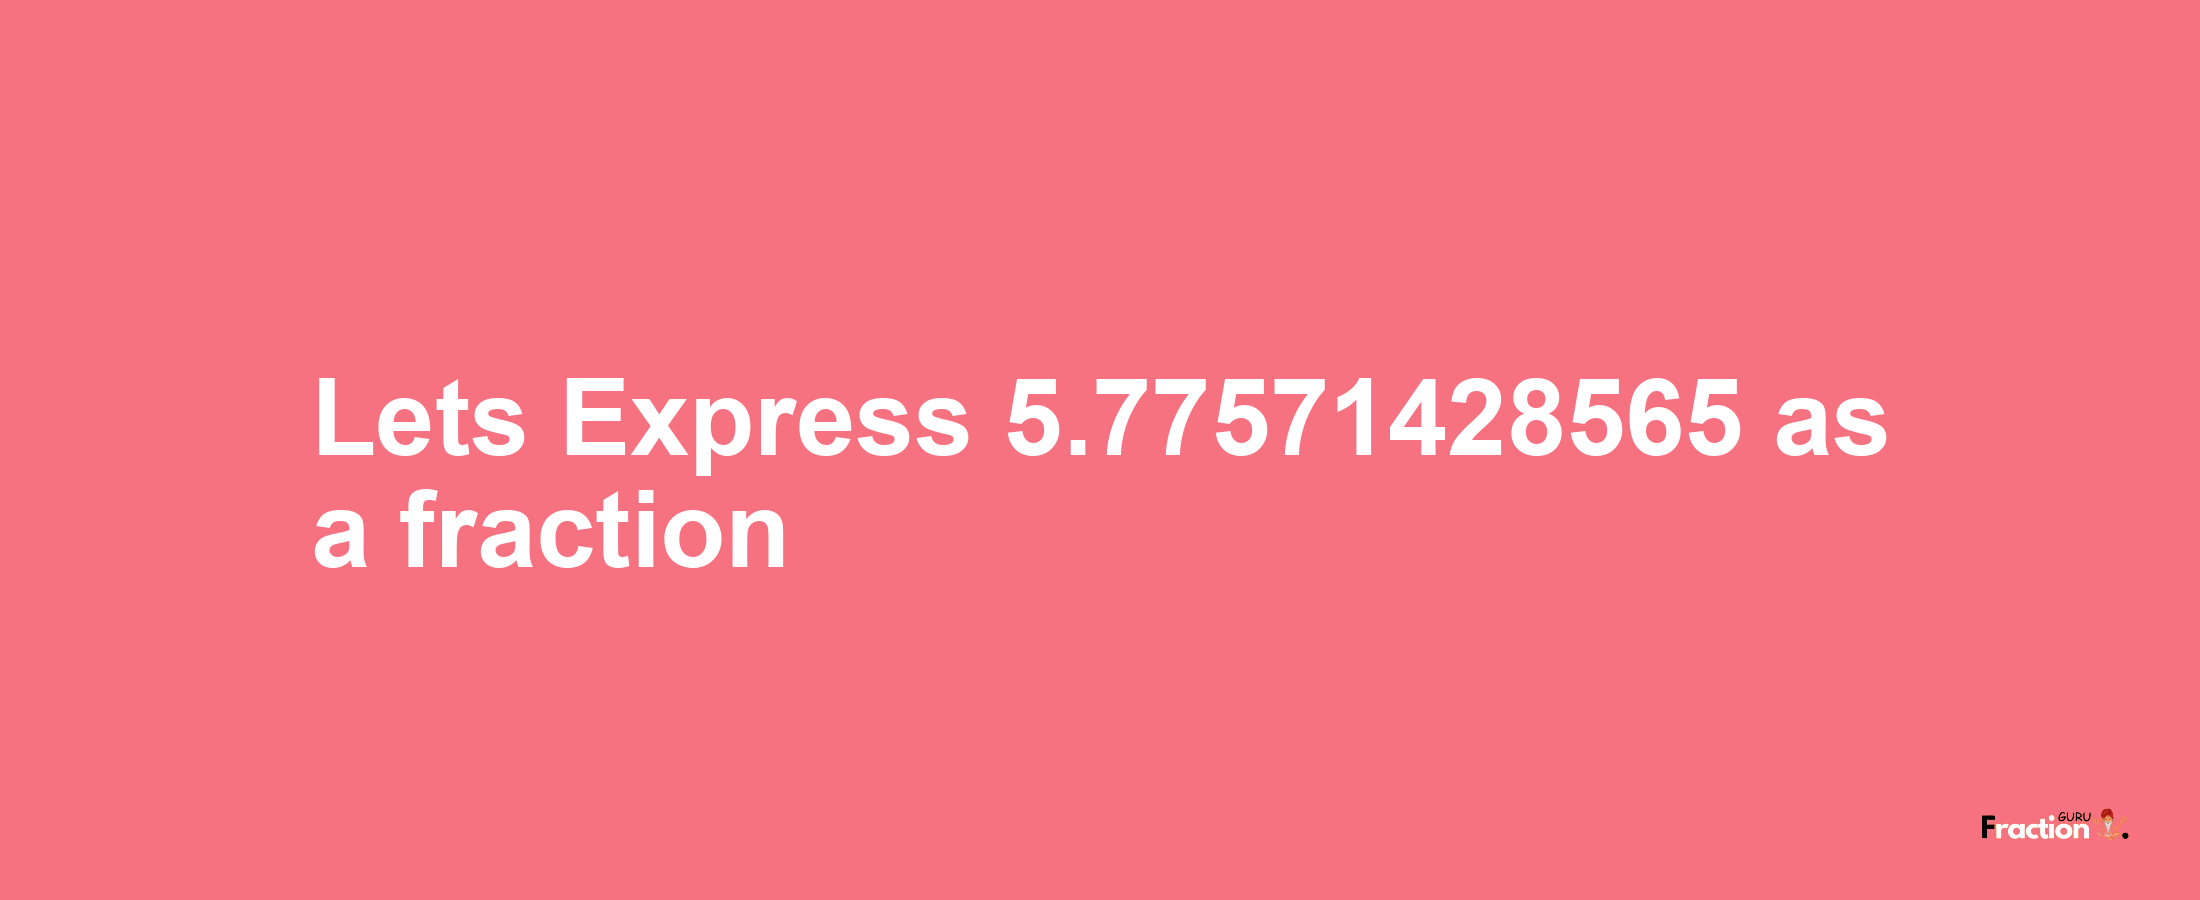 Lets Express 5.77571428565 as afraction